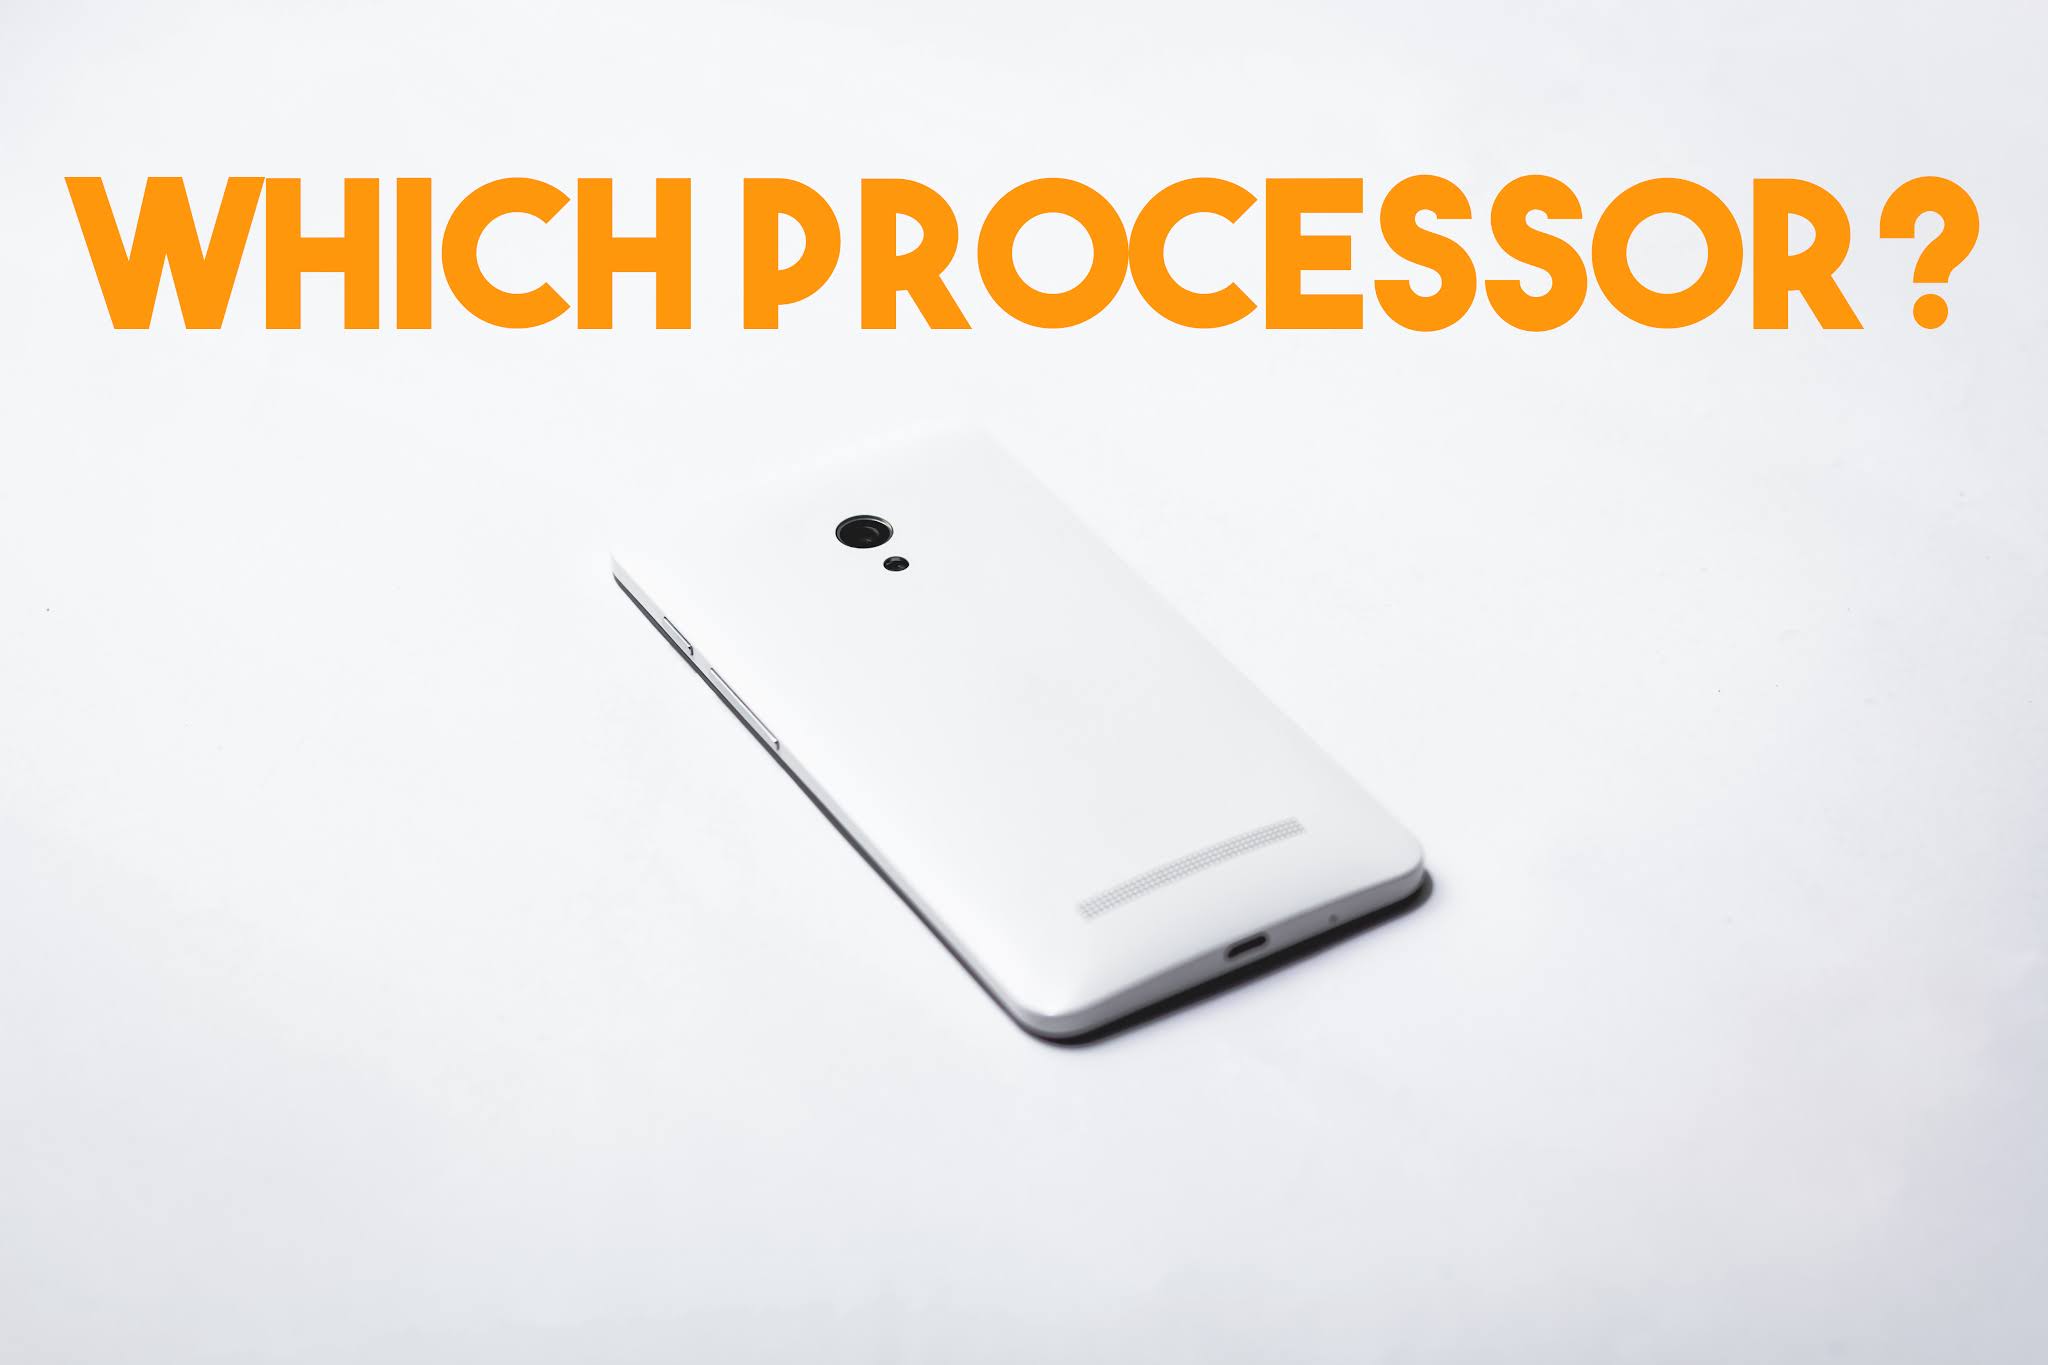 How to Check the Processor on your Android Phone or Tablet